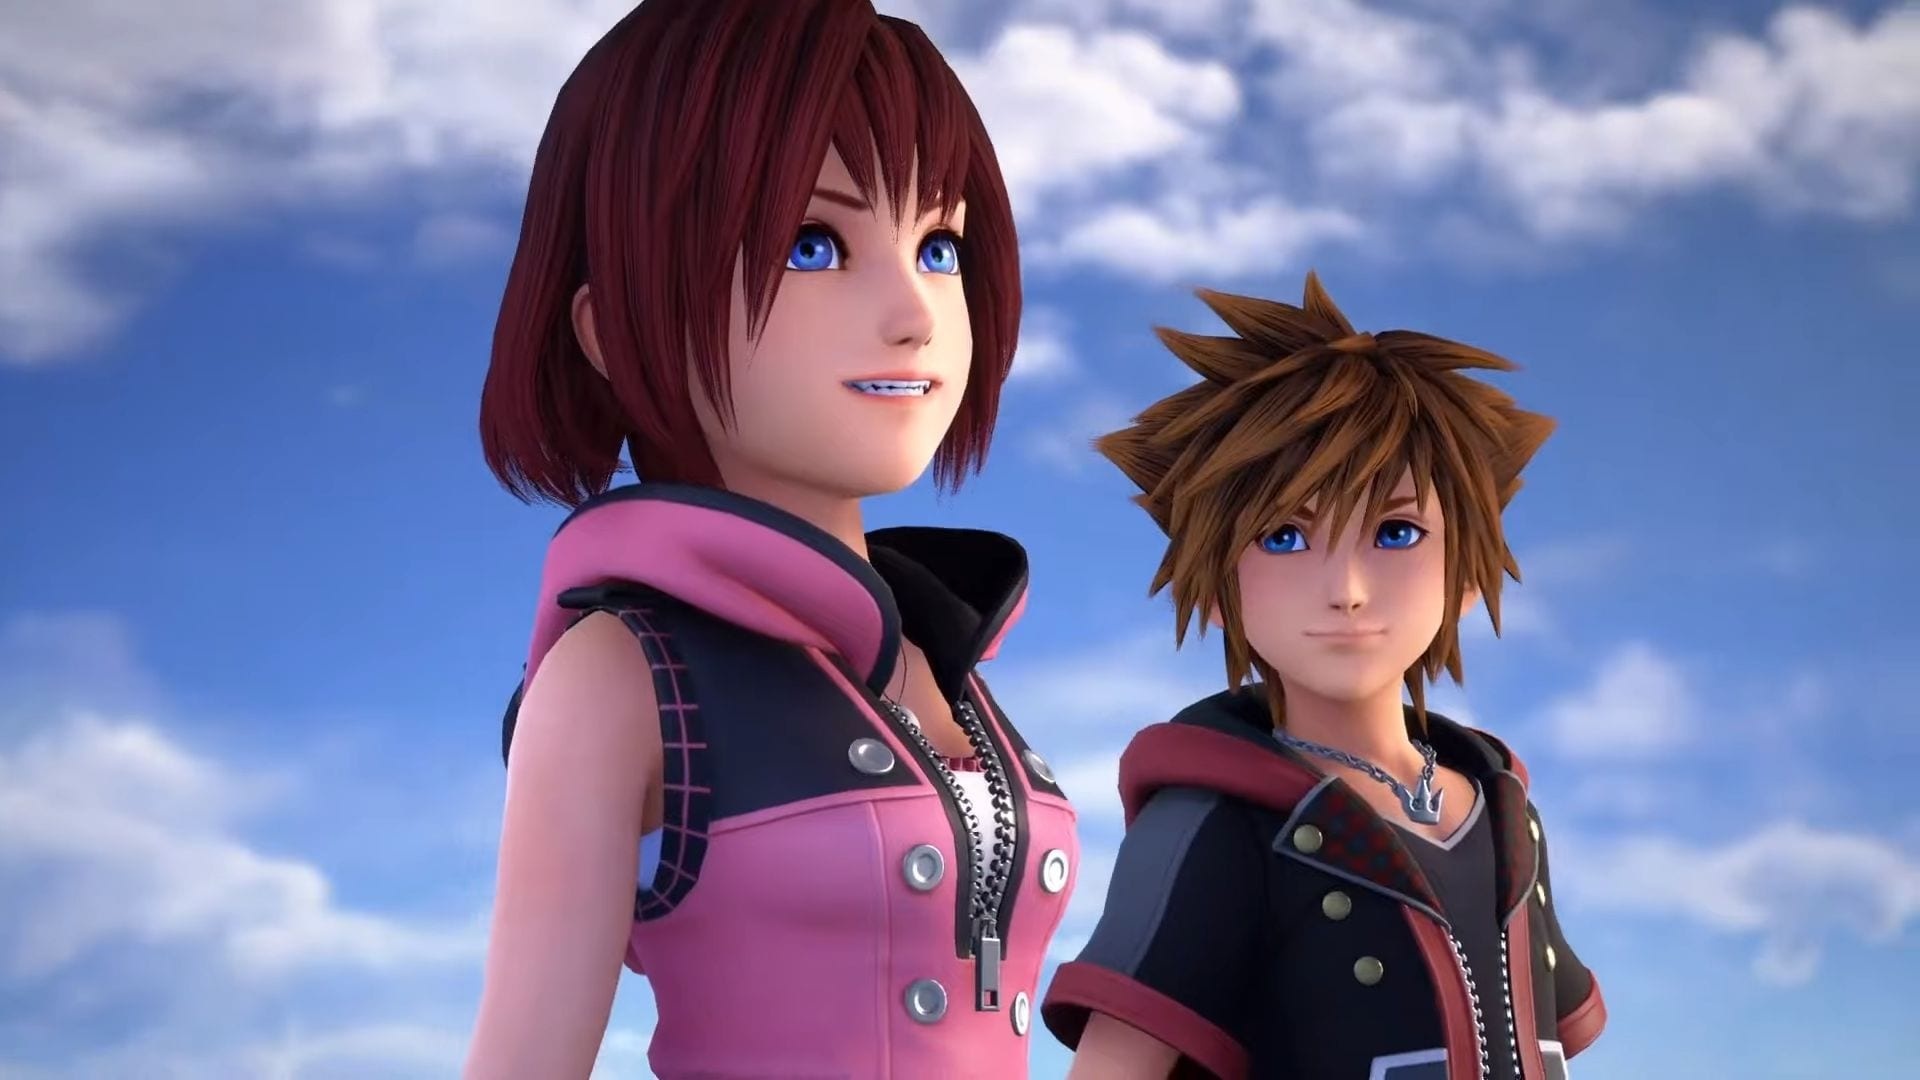 Kairi kingdom hearts anime, DLC release dates, Exciting new content, Extended adventure, 1920x1080 Full HD Desktop